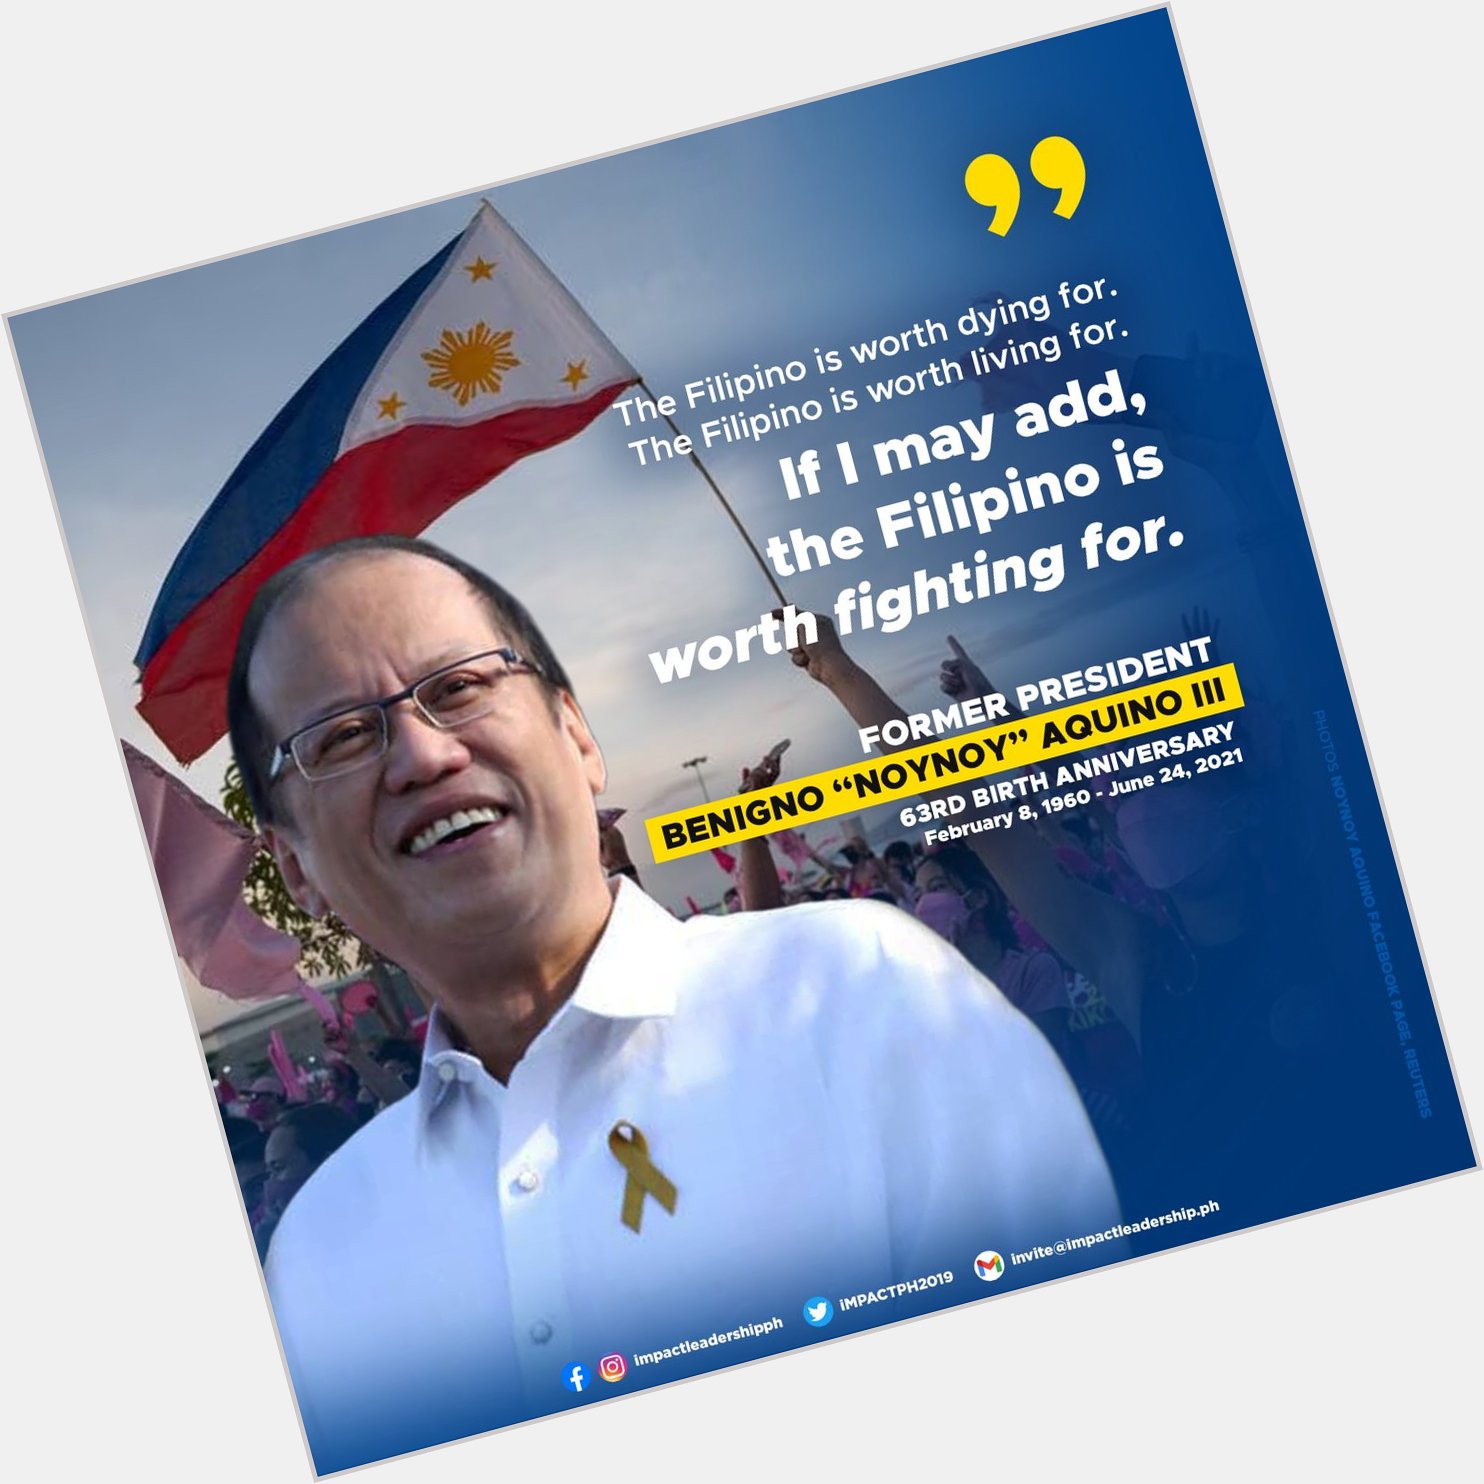 Happy birthday po, President Noynoy Aquino. We thank you for your genuine service to the Filipino people. 